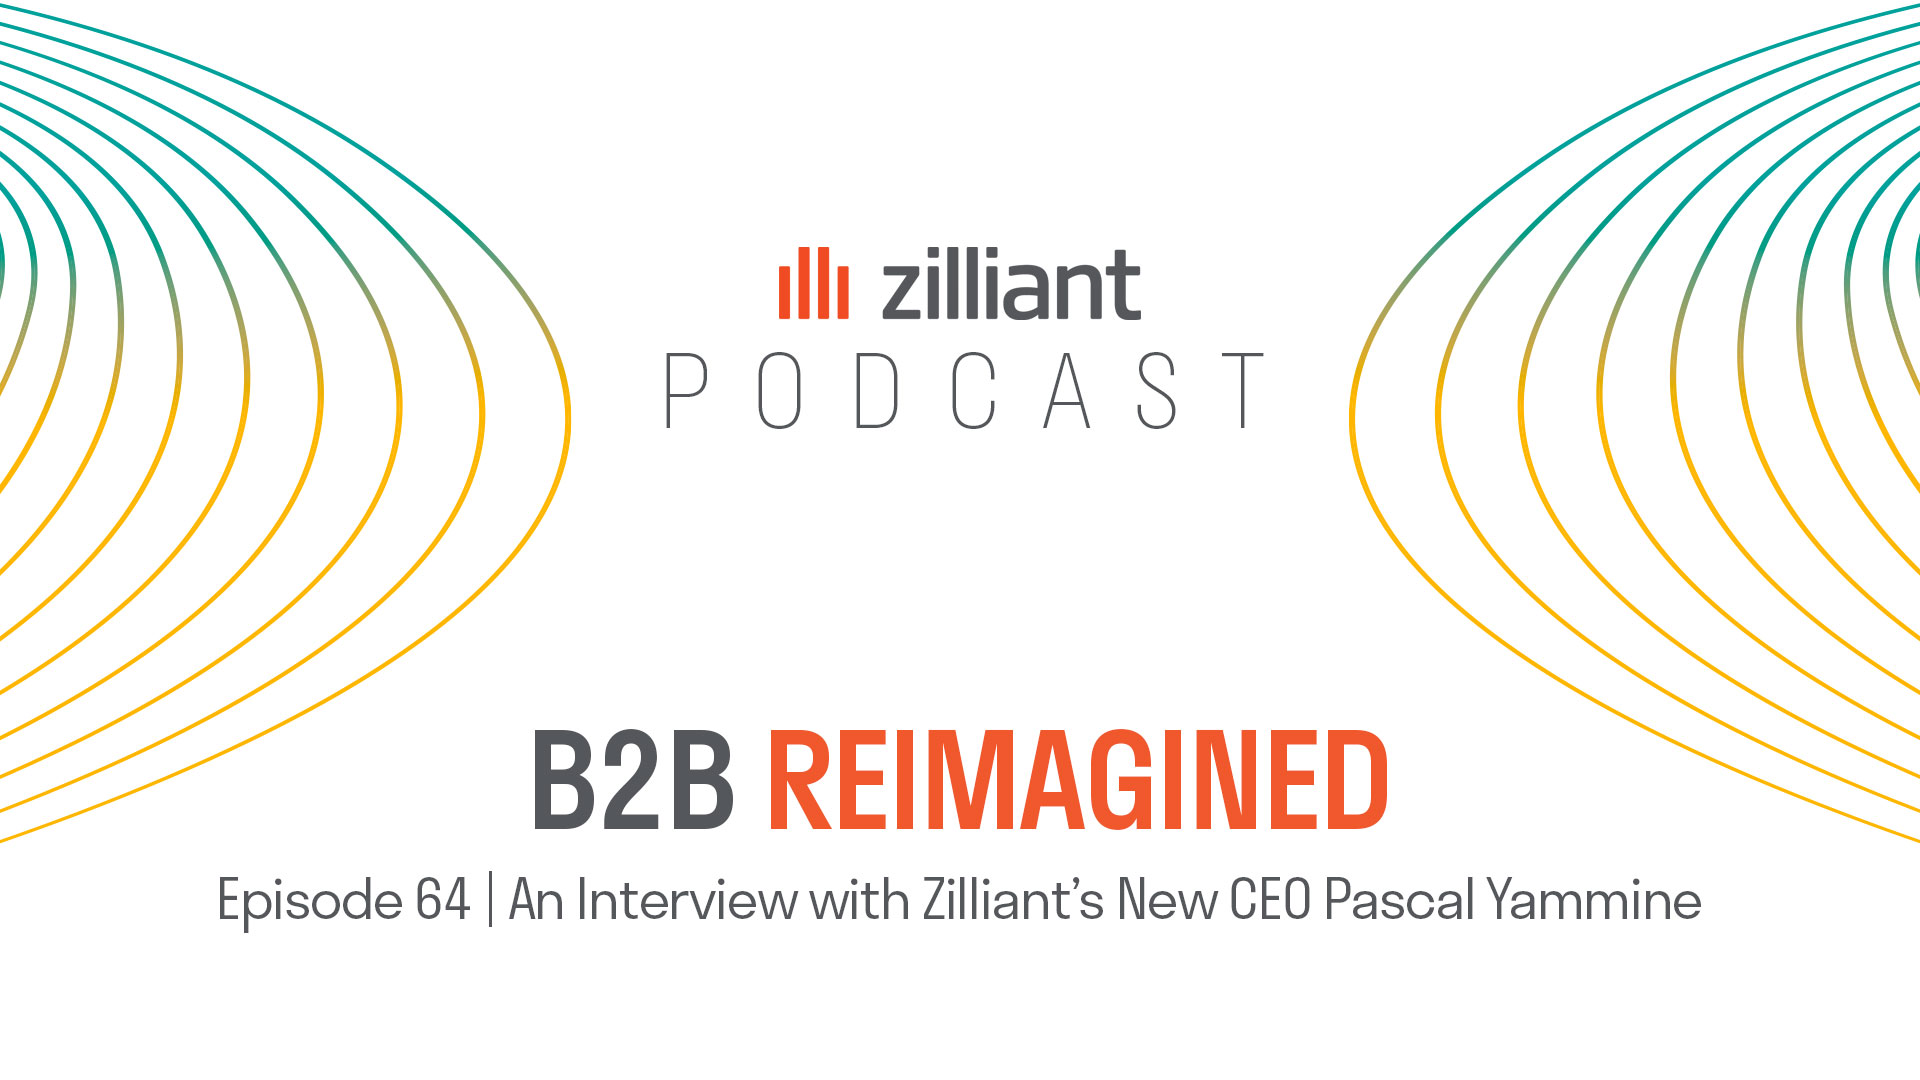 An Interview with Zilliant’s New CEO Pascal Yammine